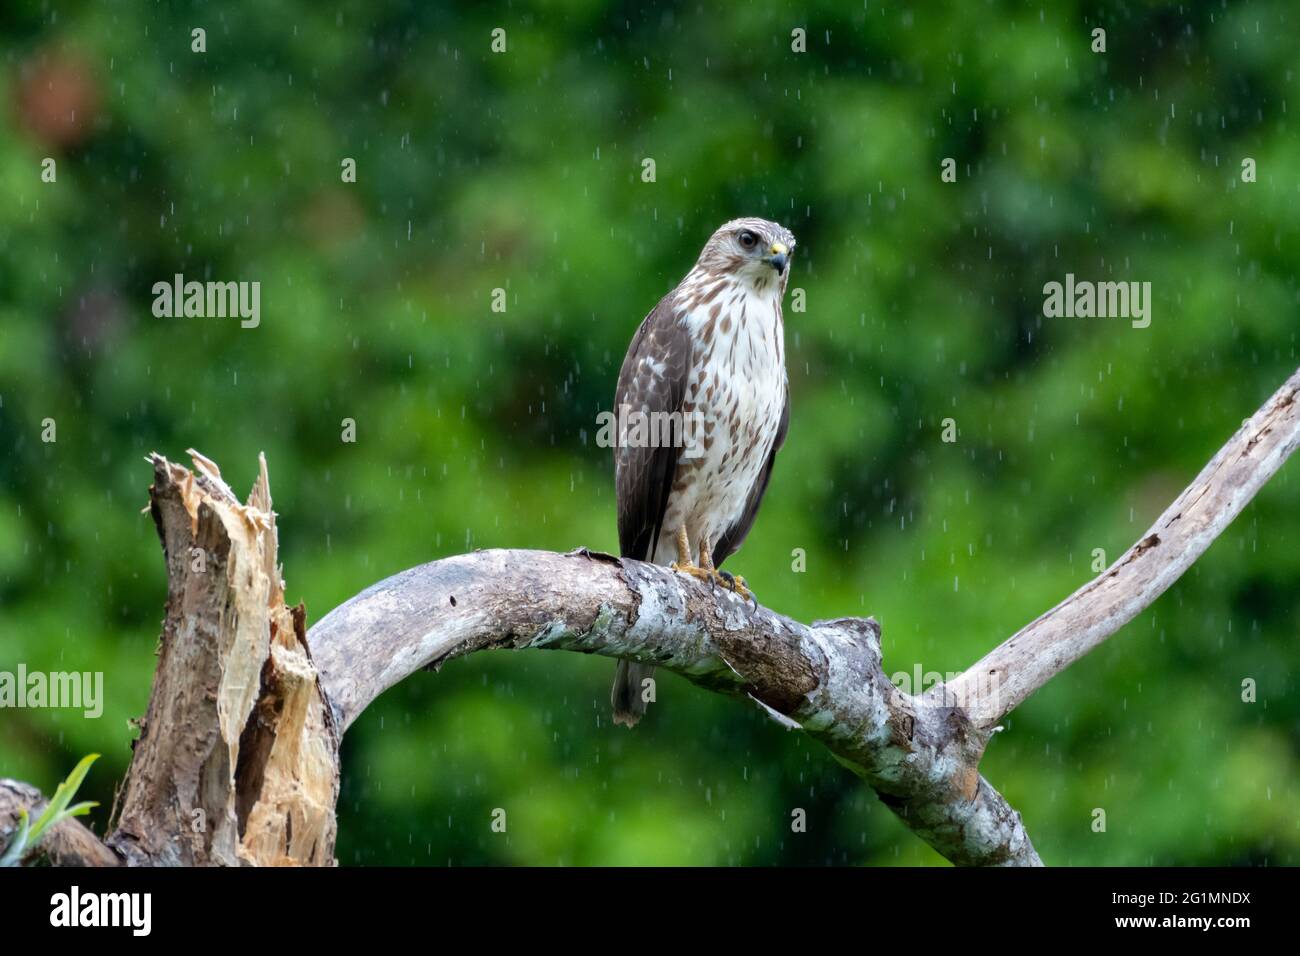 A juvenile Broad-winged Hawk (buteo platypterus) perching in a tree in the rainforest. Raptor at rest. Bird of prey in nature. Wildlfie. Stock Photo